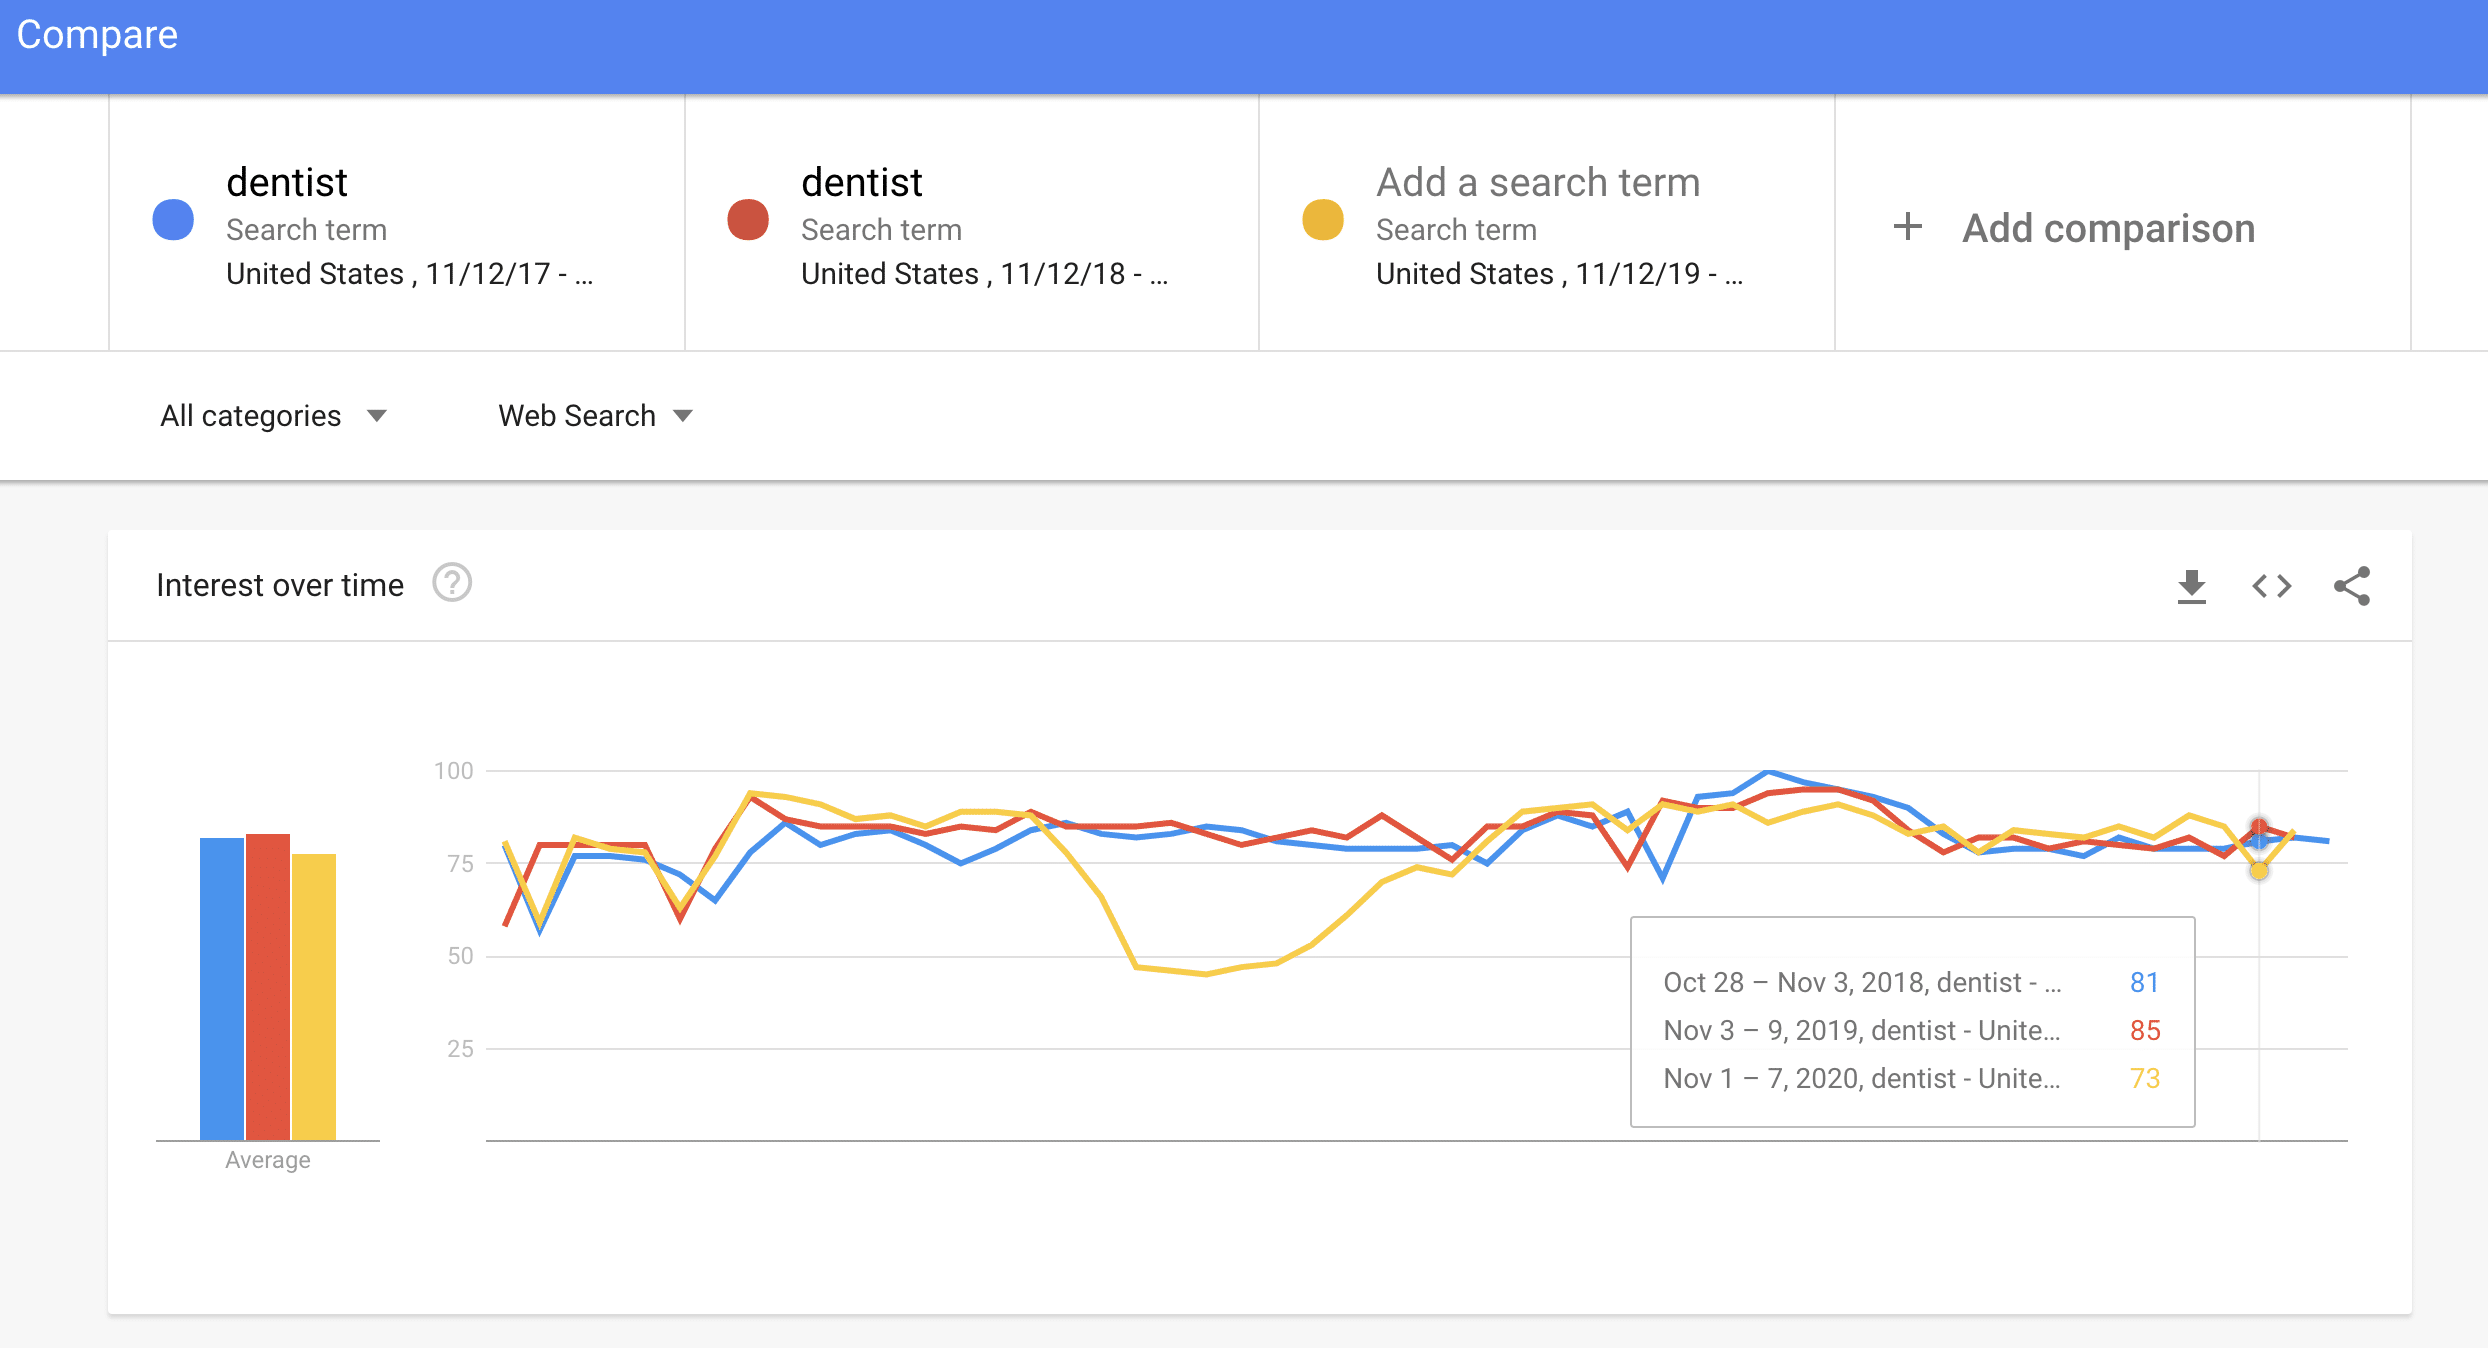 Google trends projection for the terms 'dentist' in 2021